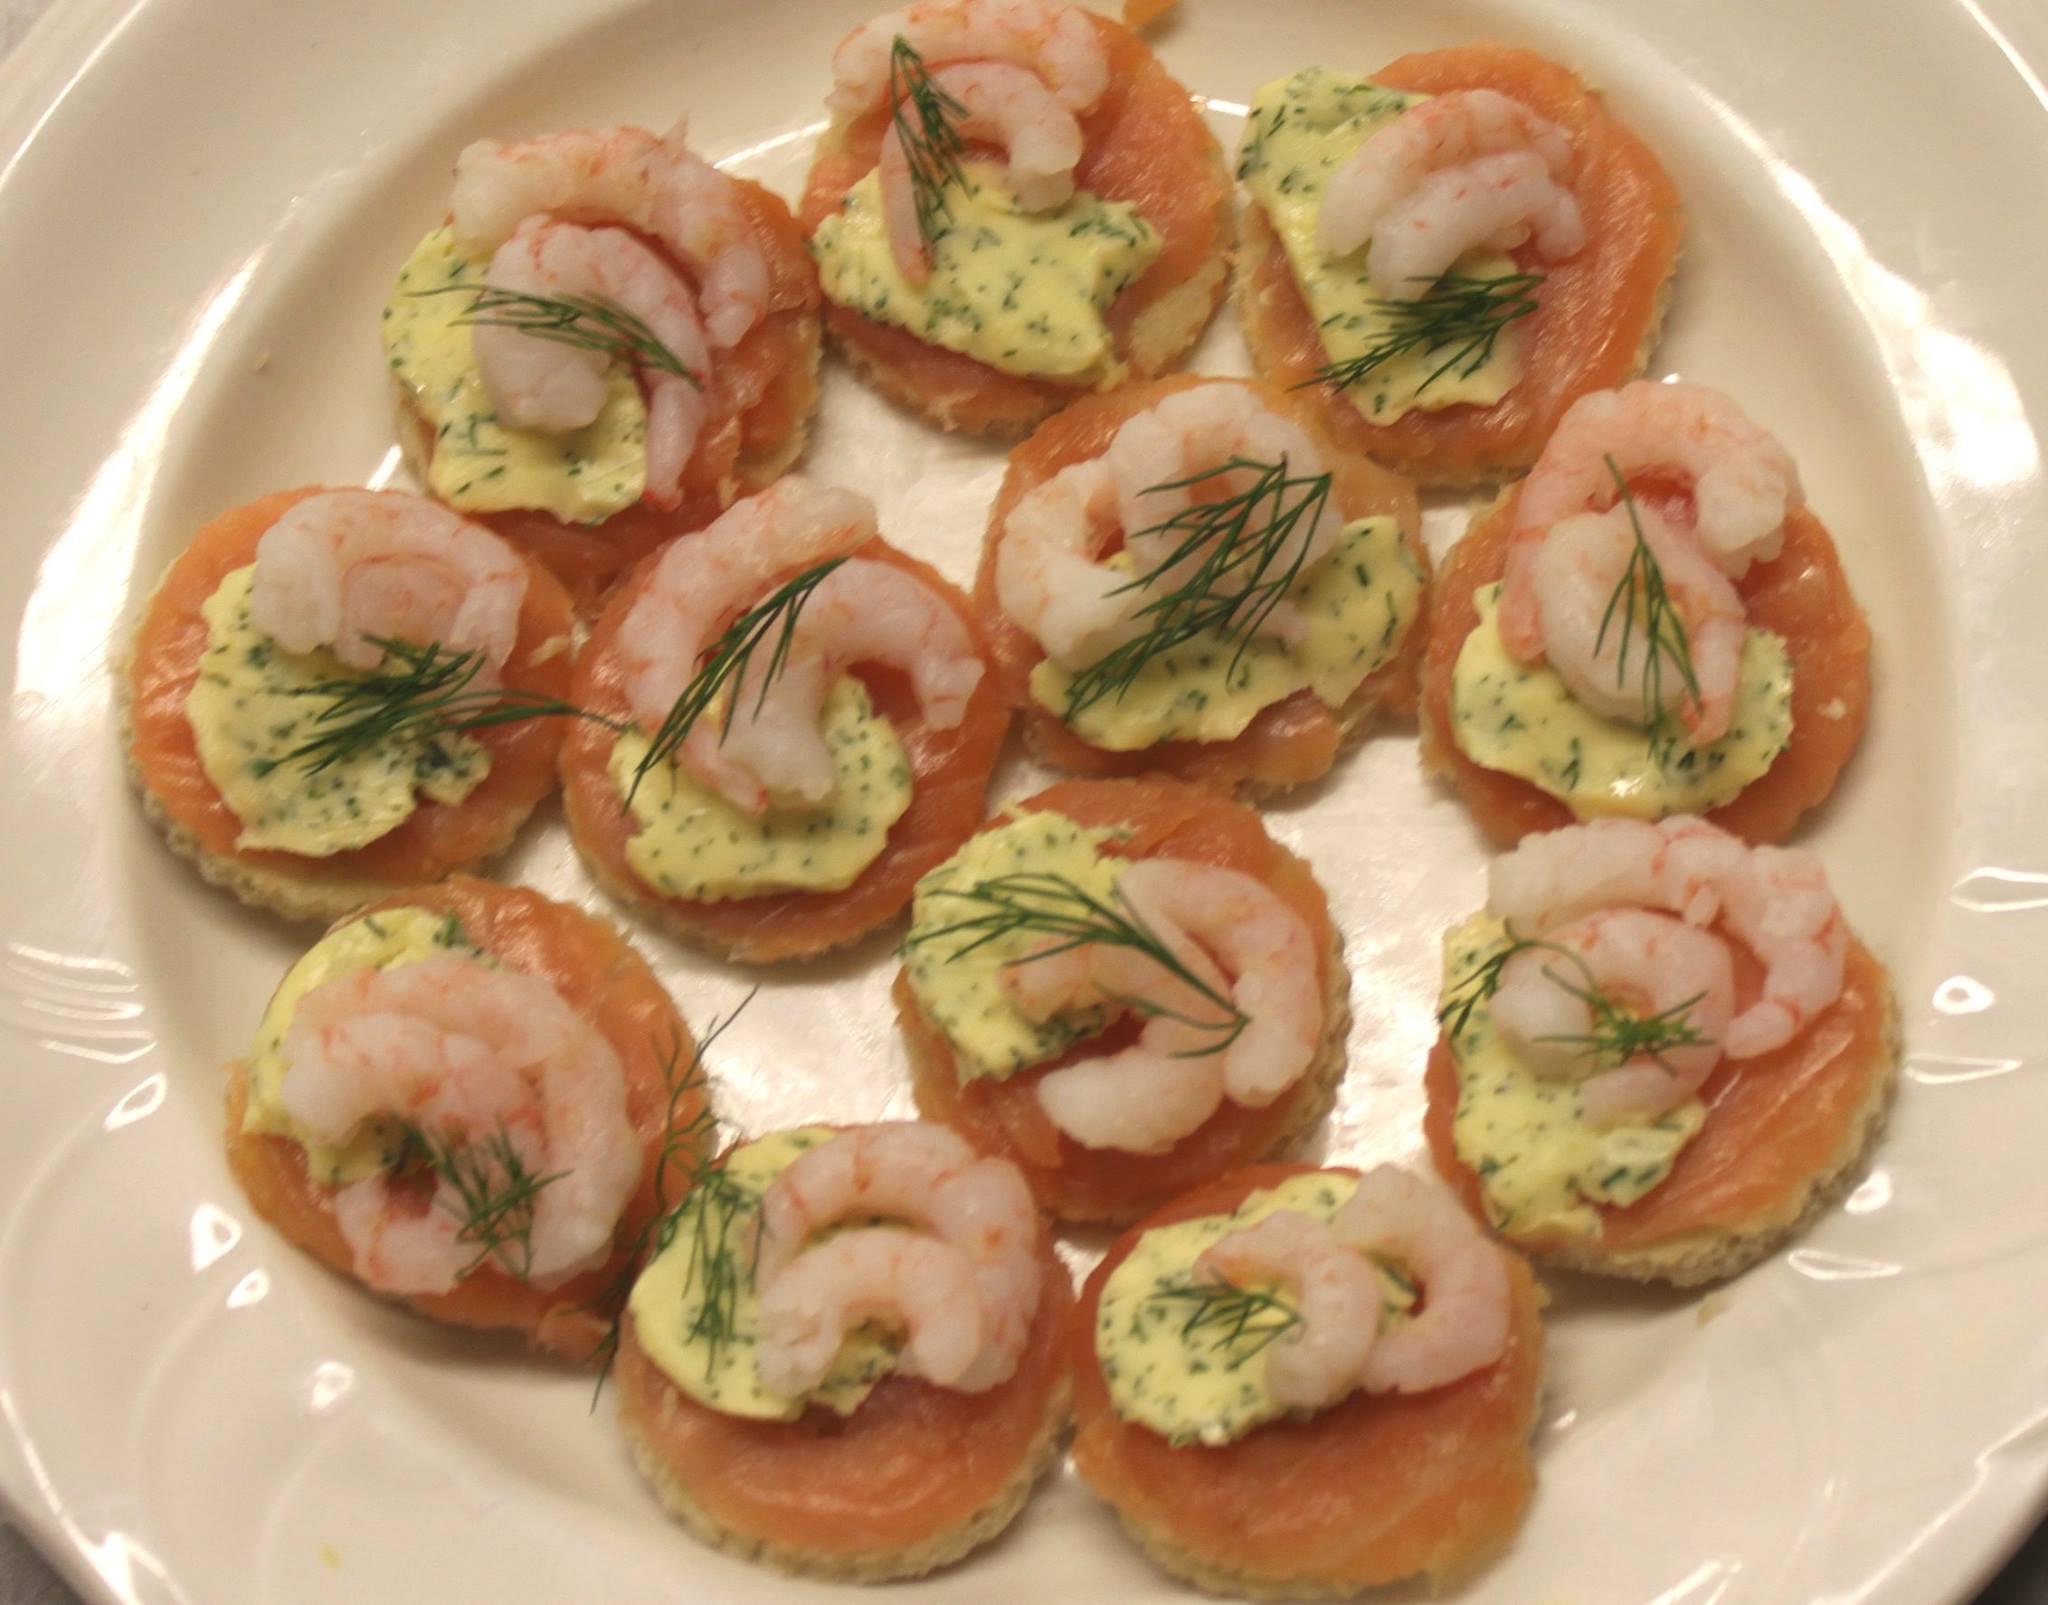 Smoked salmon and dill butter on a crouton canape.